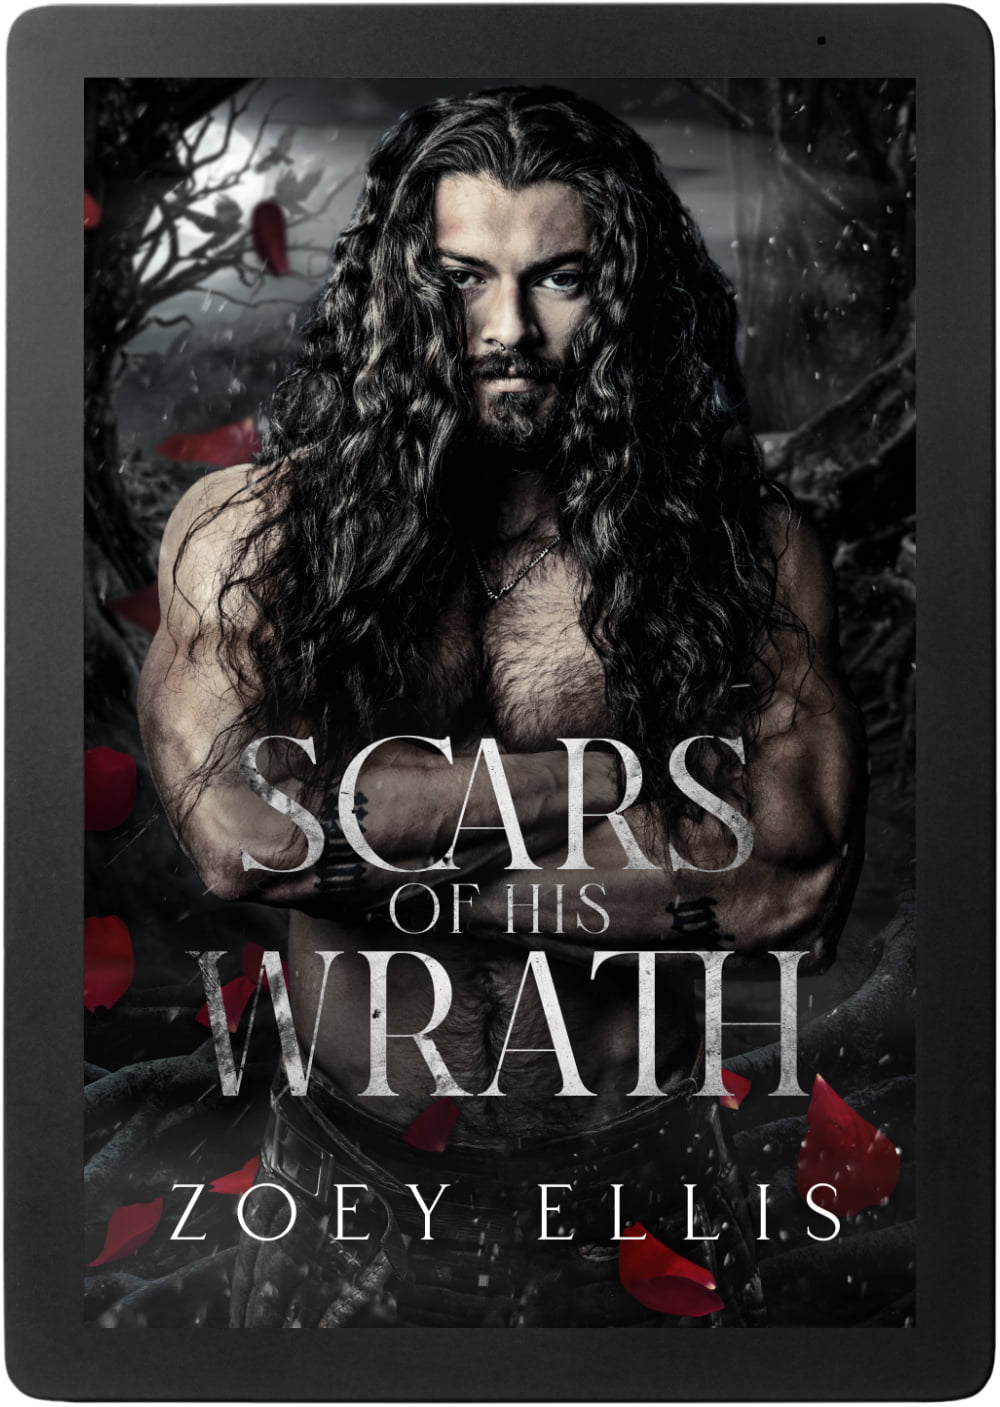 Scars of His Wrath model cover